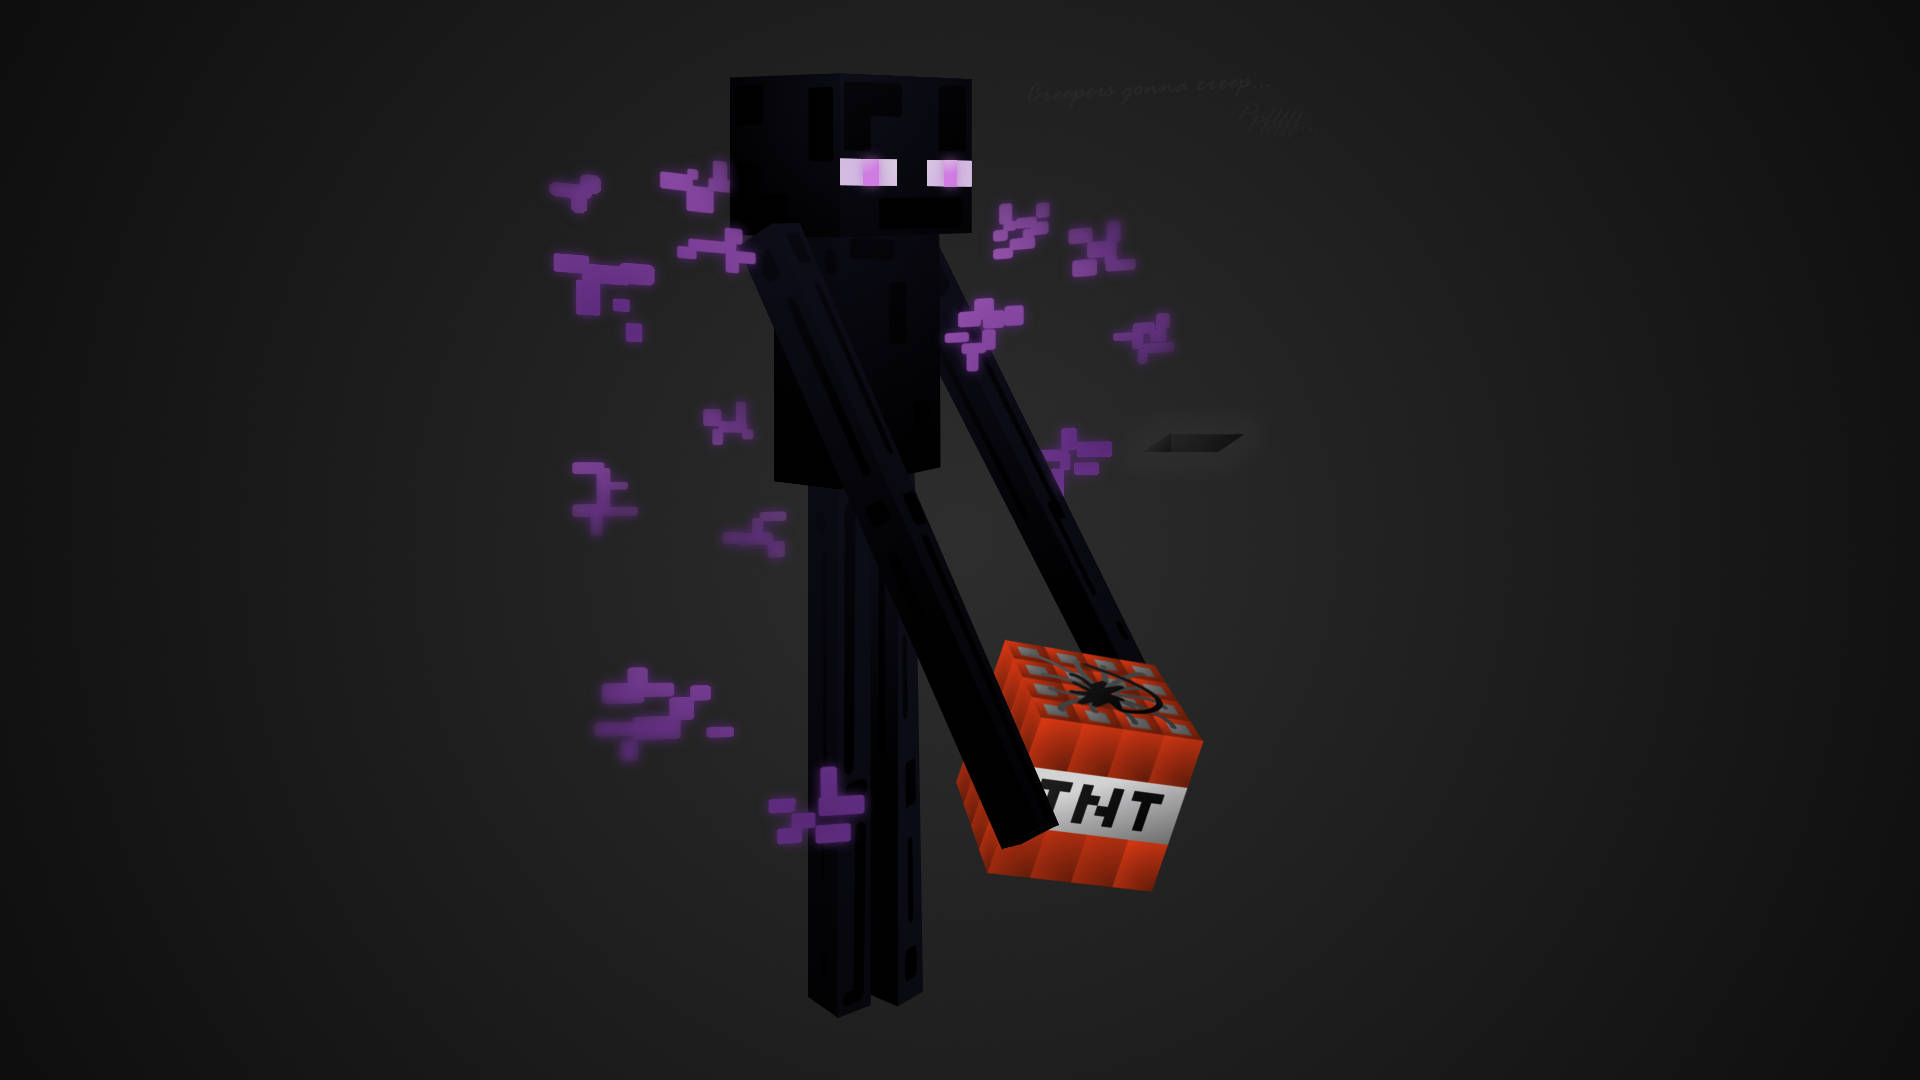 The Enderman, A Mysterious Creature Of Minecraft Wallpaper